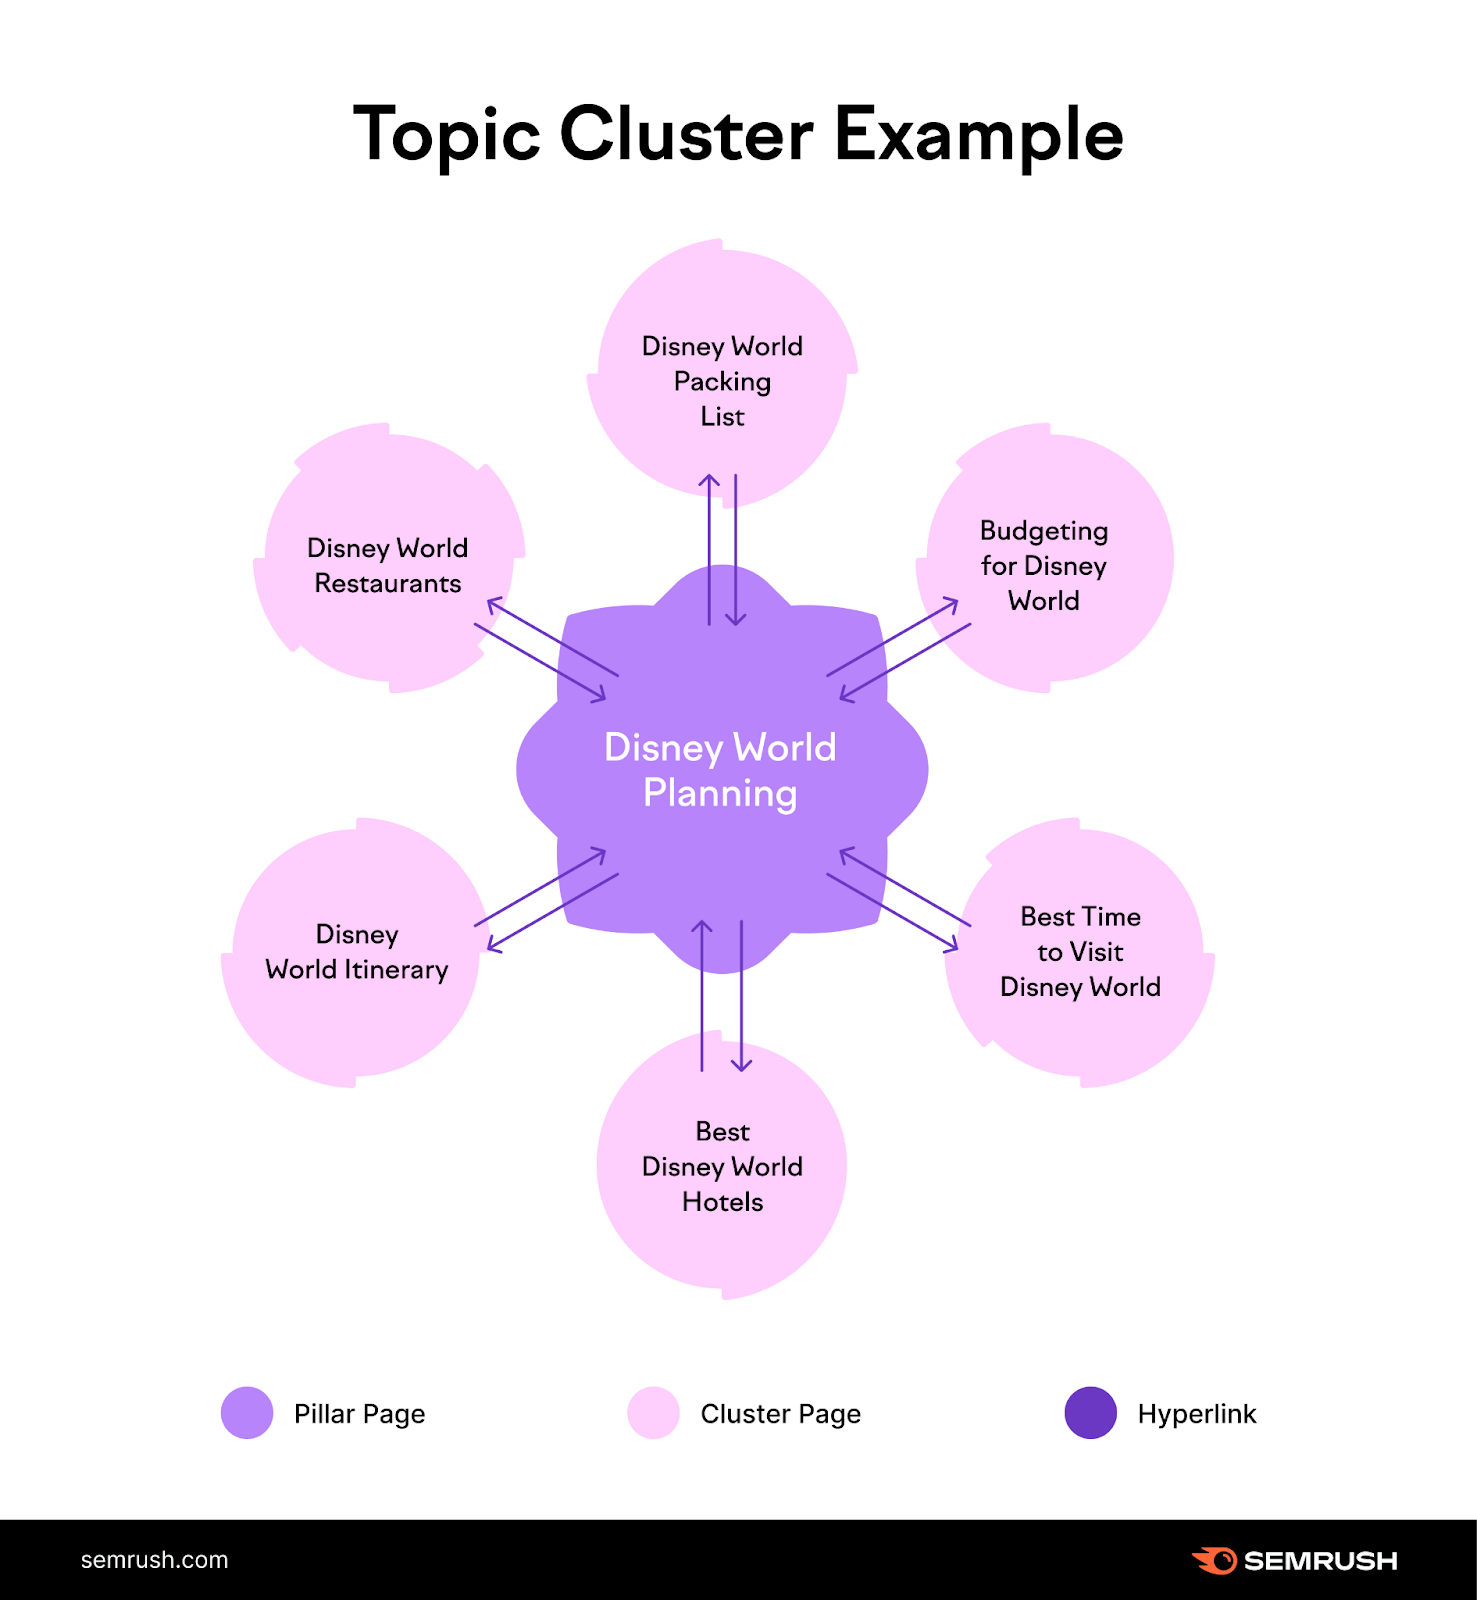 Topic cluster example with "Disney World planning"